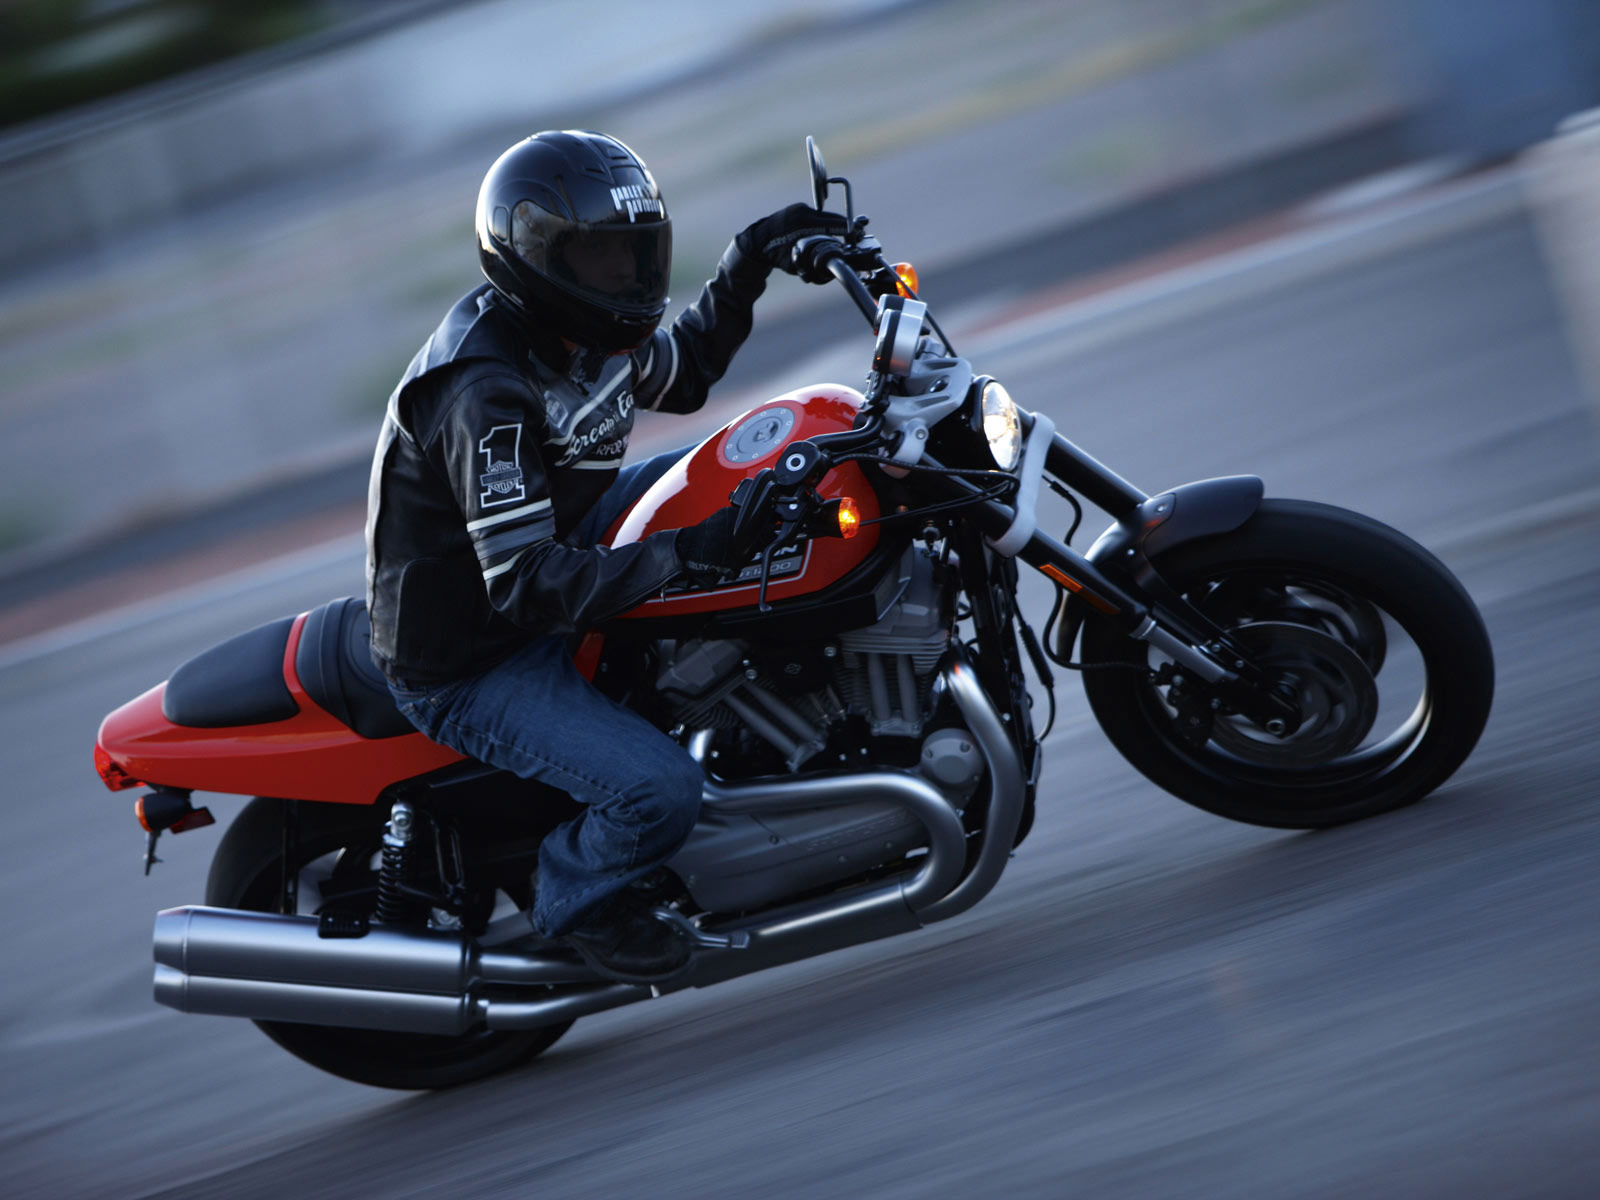 Harley Davidson Xr1200 Motorcycle Review Wallpapers